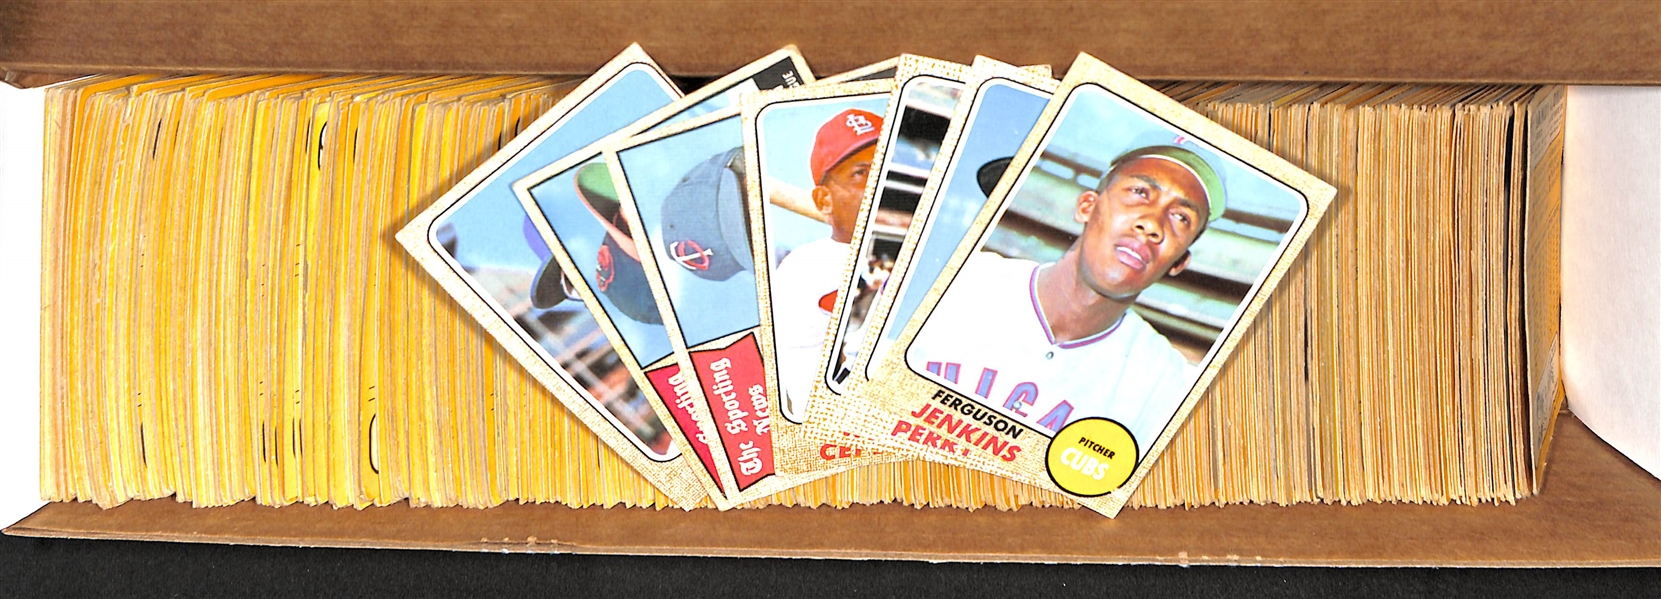 Approx. 500 Assorted 1968 Topps Baseball Cards w. Minor Stars